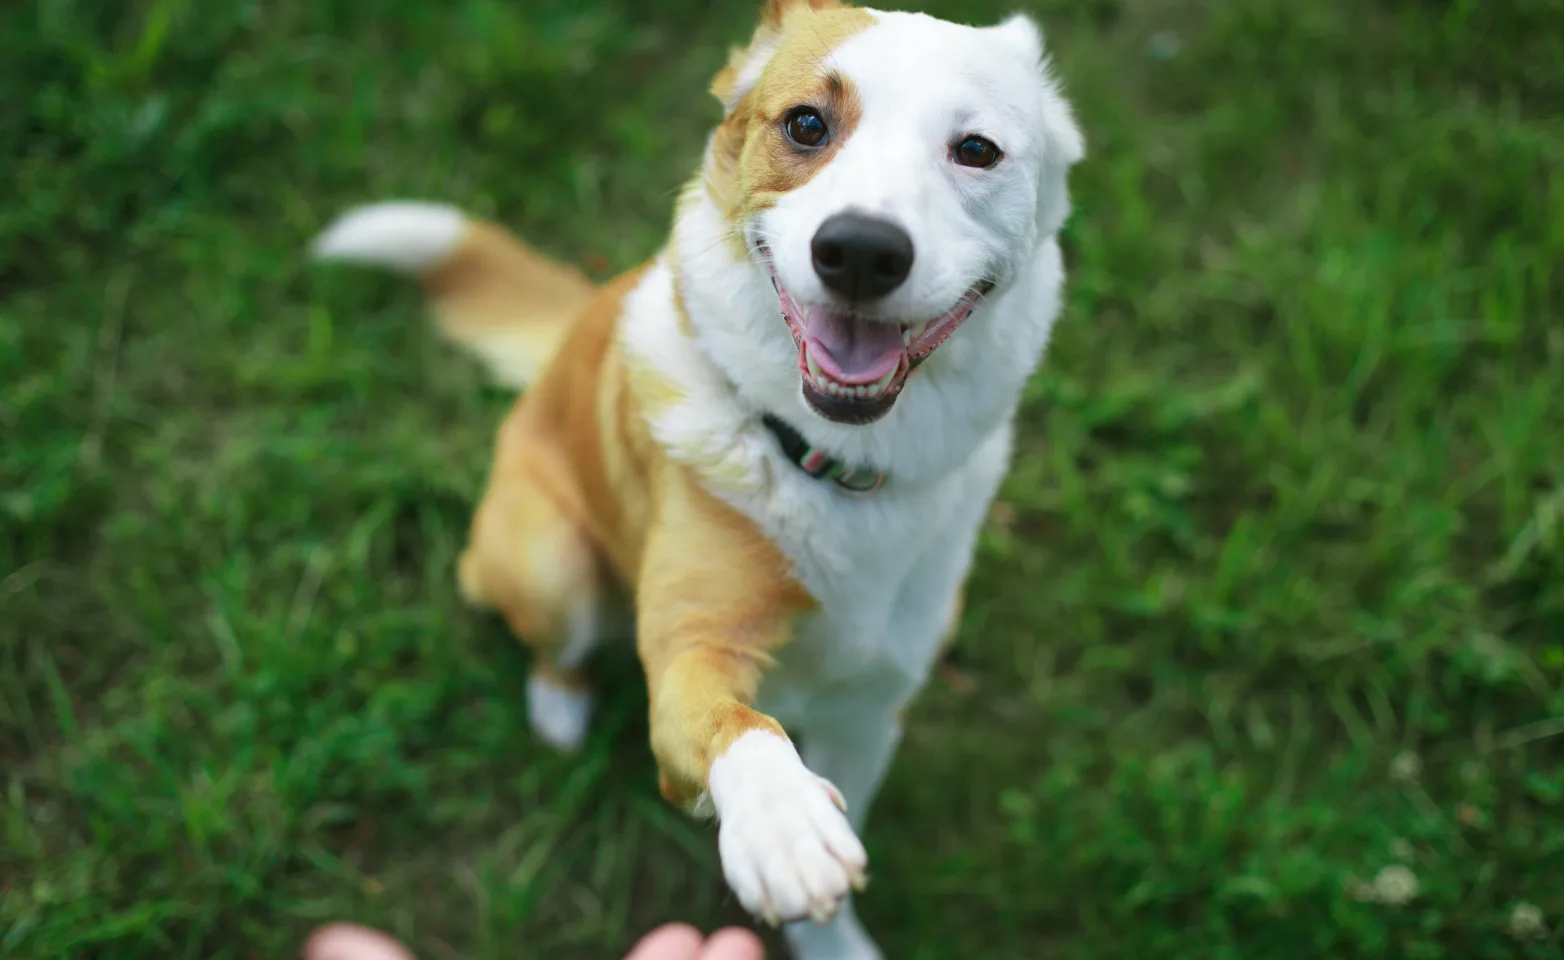 dog reaching its paw out and smiling